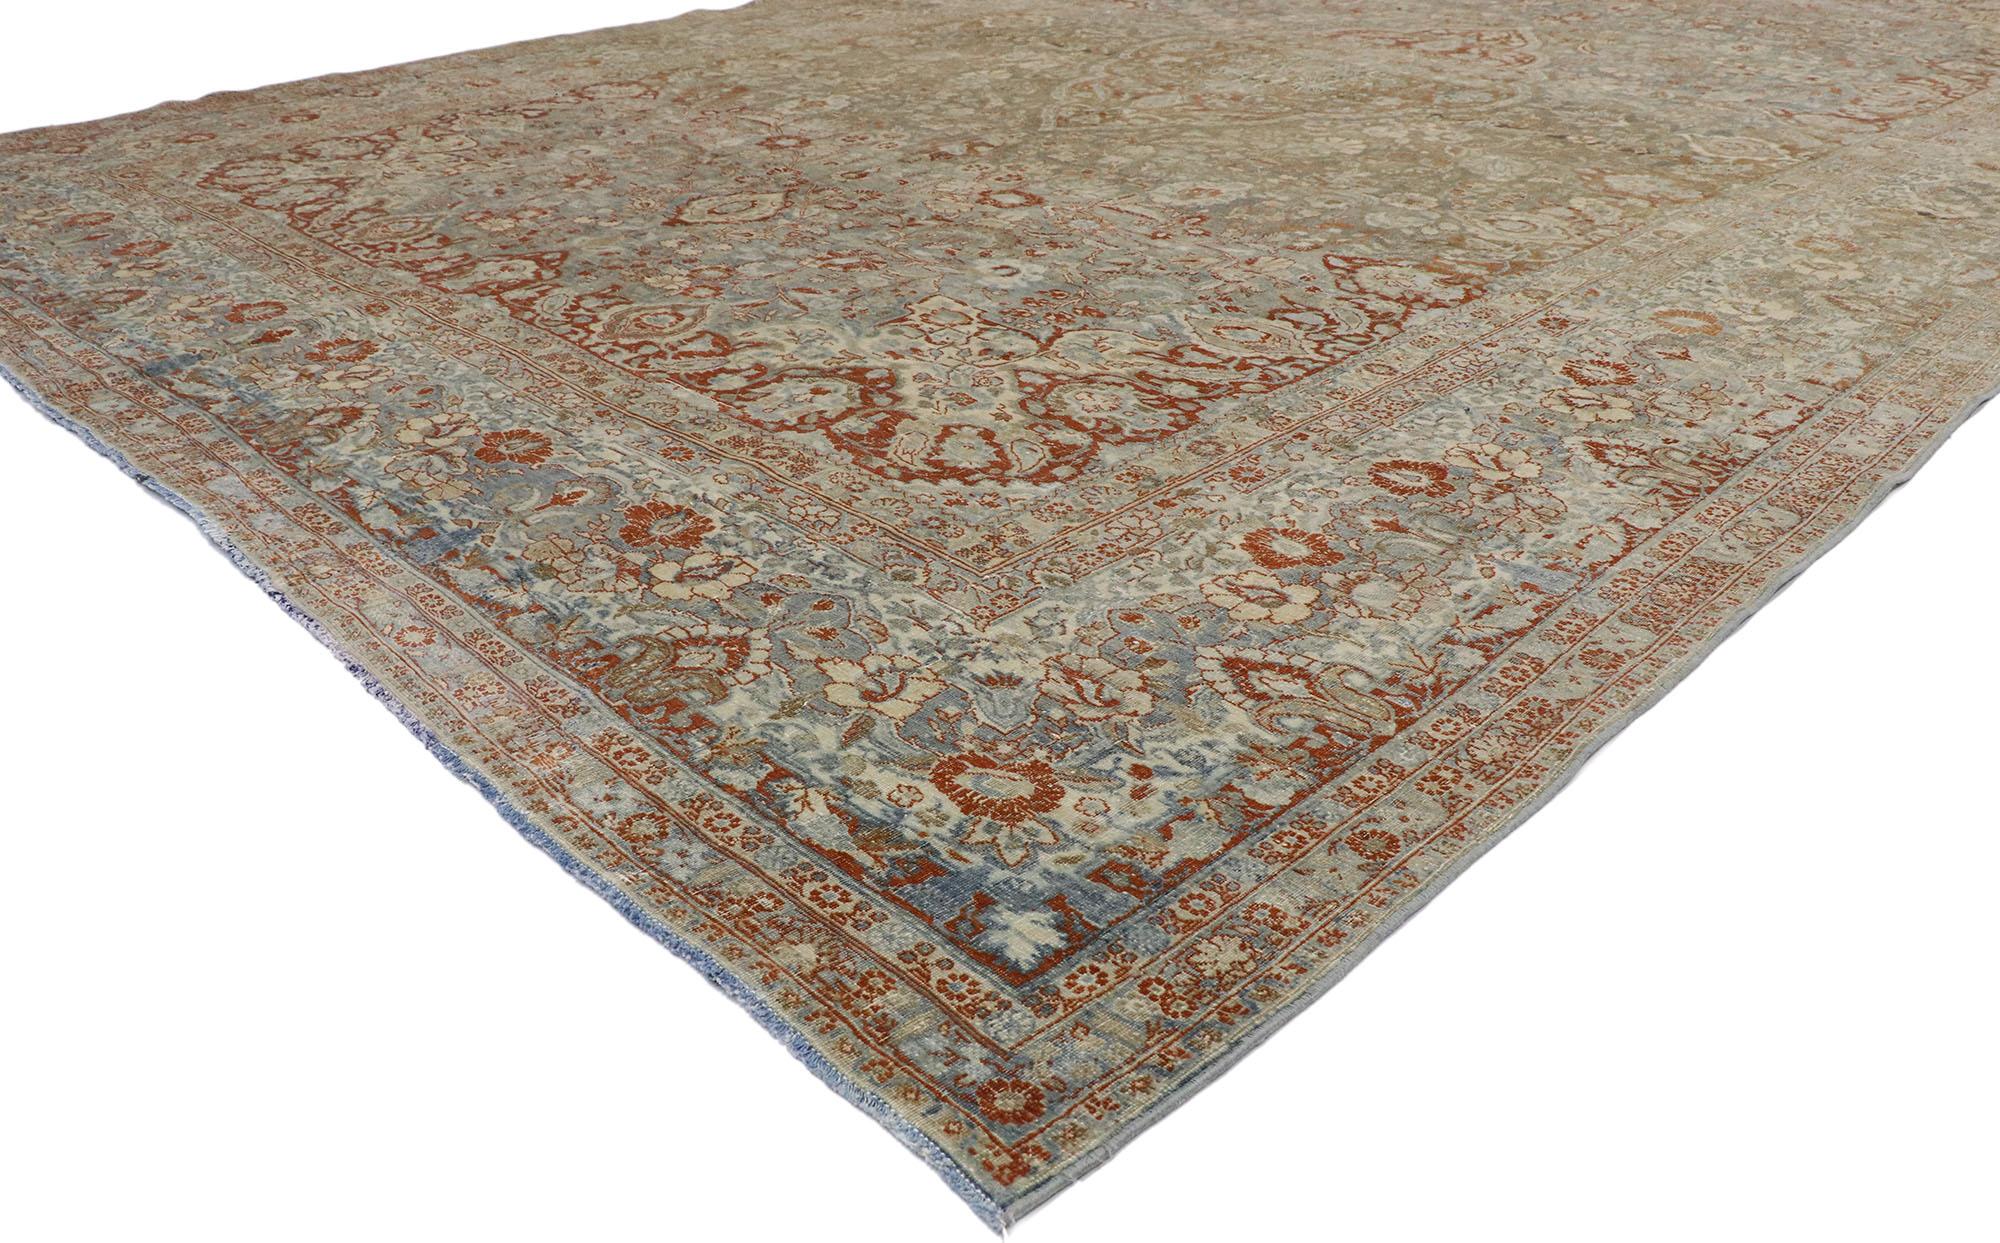 53389 Antique Persian Mashhad Rug Hotel Lobby Size Carpet 10'11 x 17'08. With a timeless botanical pattern and lovingly timeworn appearance, this hand knotted wool distressed antique Persian Mashhad rug will take on a curated lived-in look that